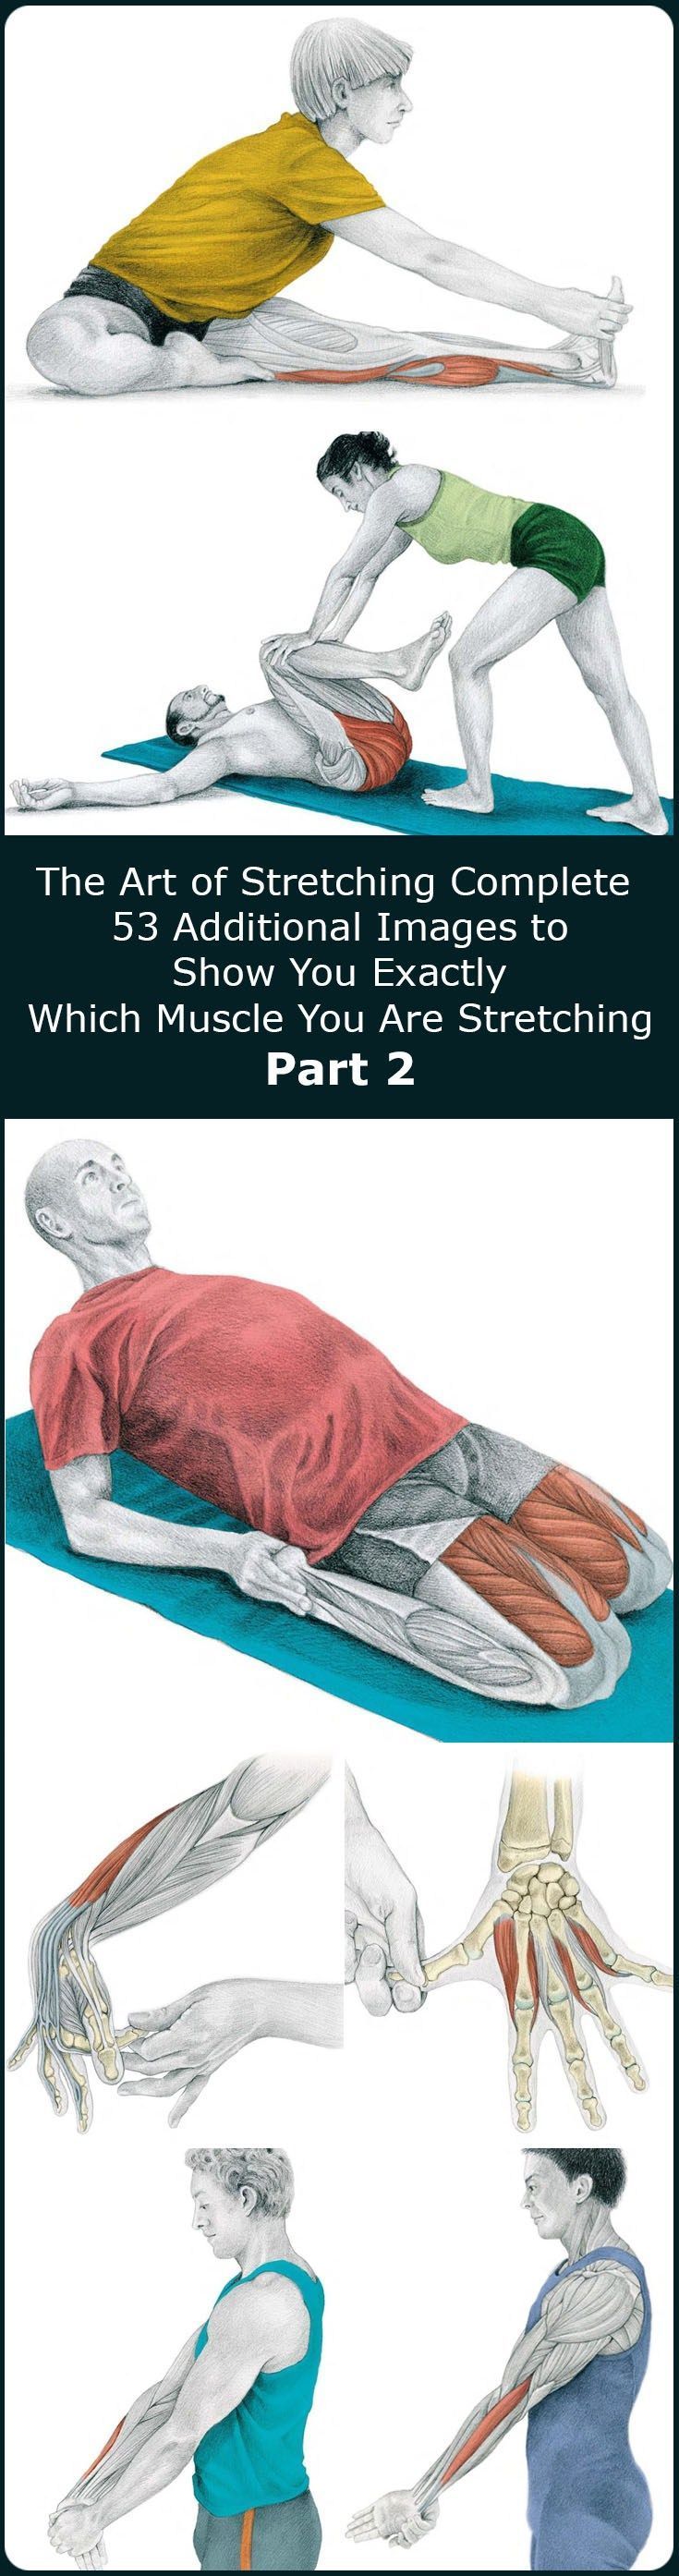 In our previous article The Art of Stretching we presented 36 illustration in color with stretches for specific muscles and